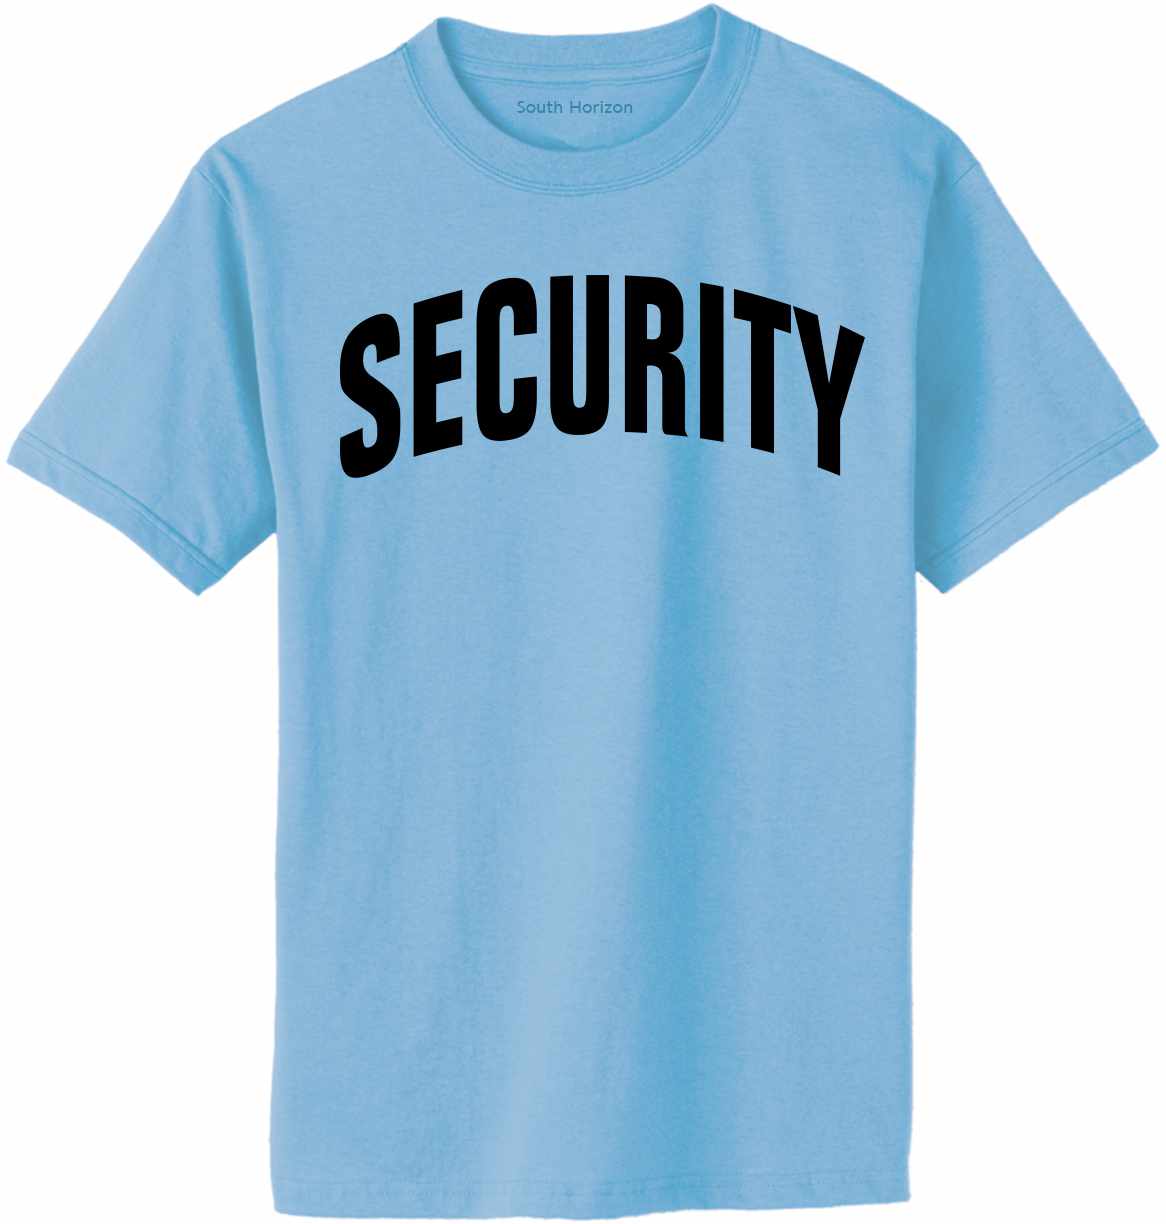 SECURITY on Adult T-Shirt (#36-1)